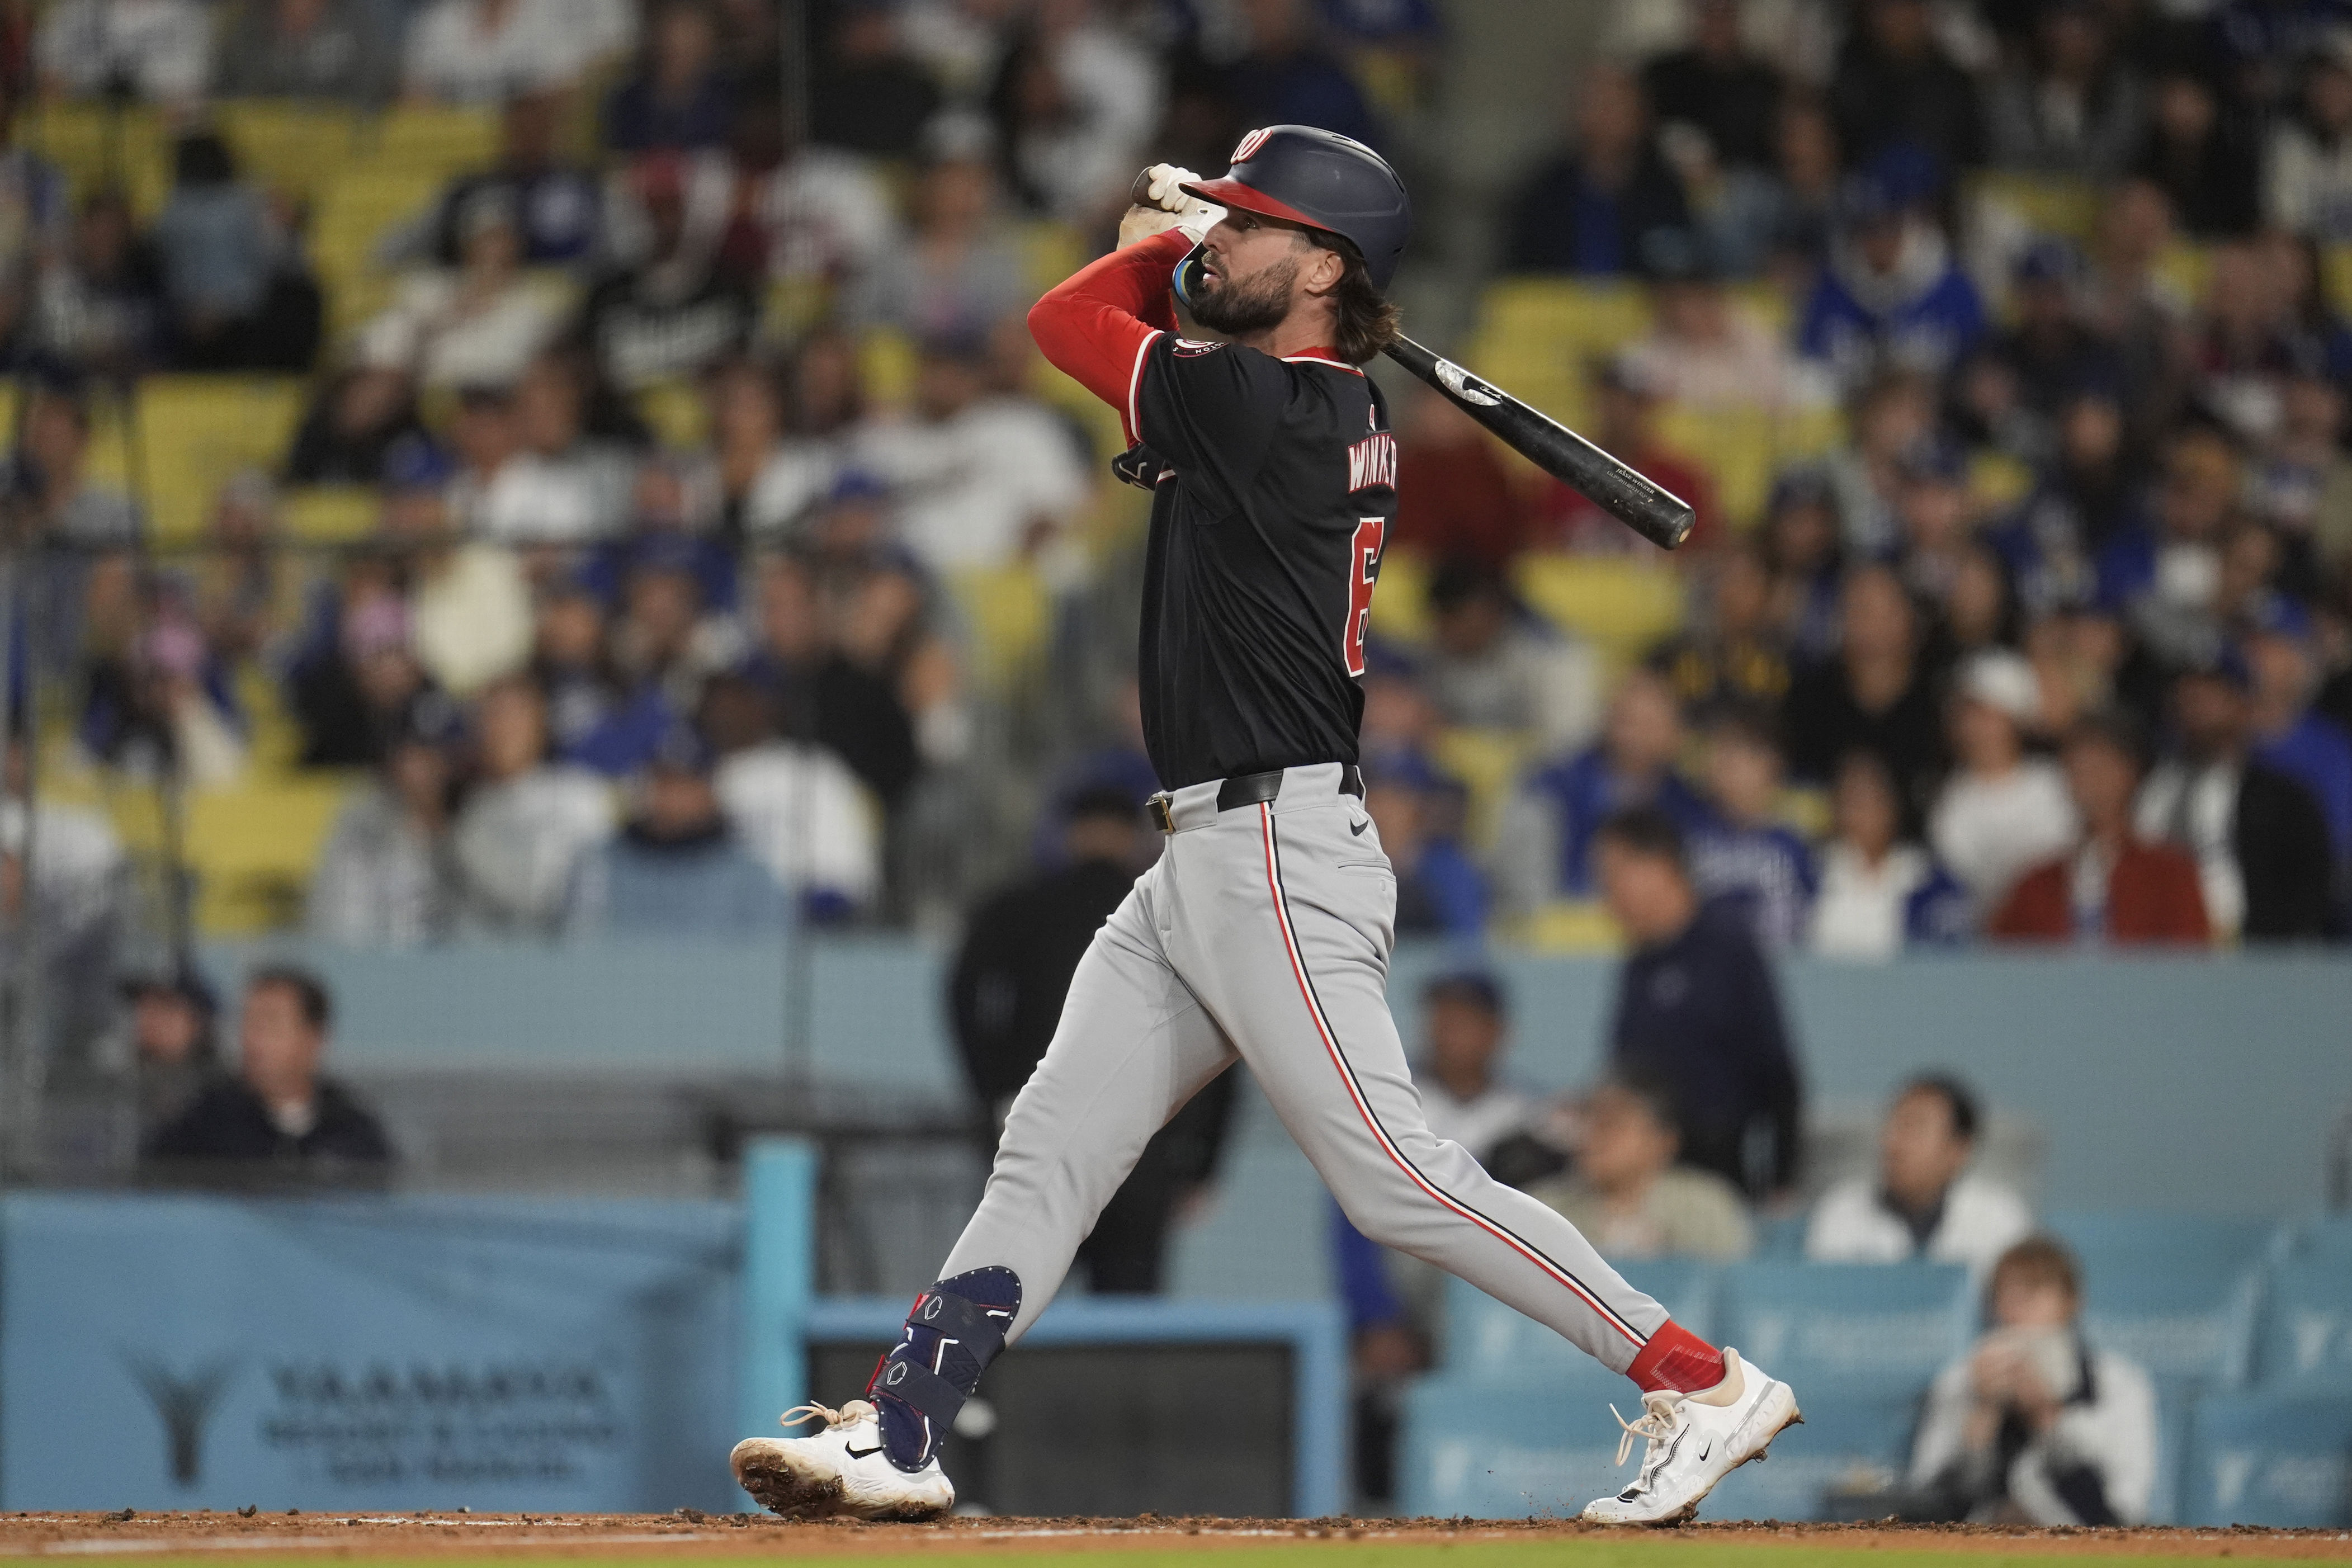 mookie betts ties career high with 5 hits as dodgers beat nationals 6-2